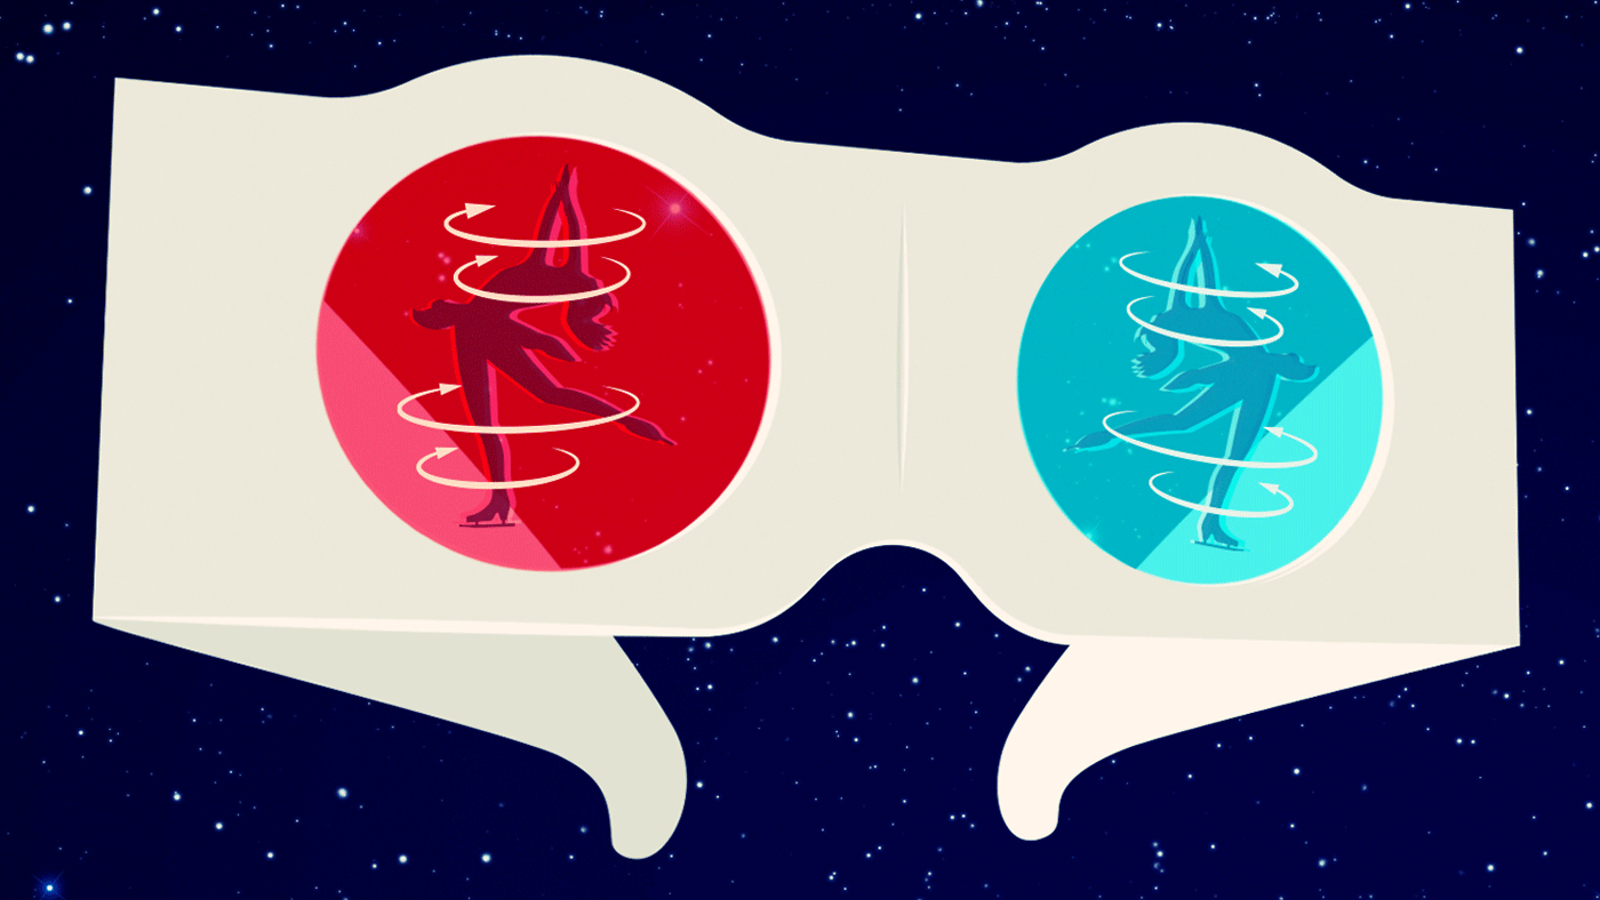 Illustration of 3D glasses in space with ballerinas spinning in red and blue lenses